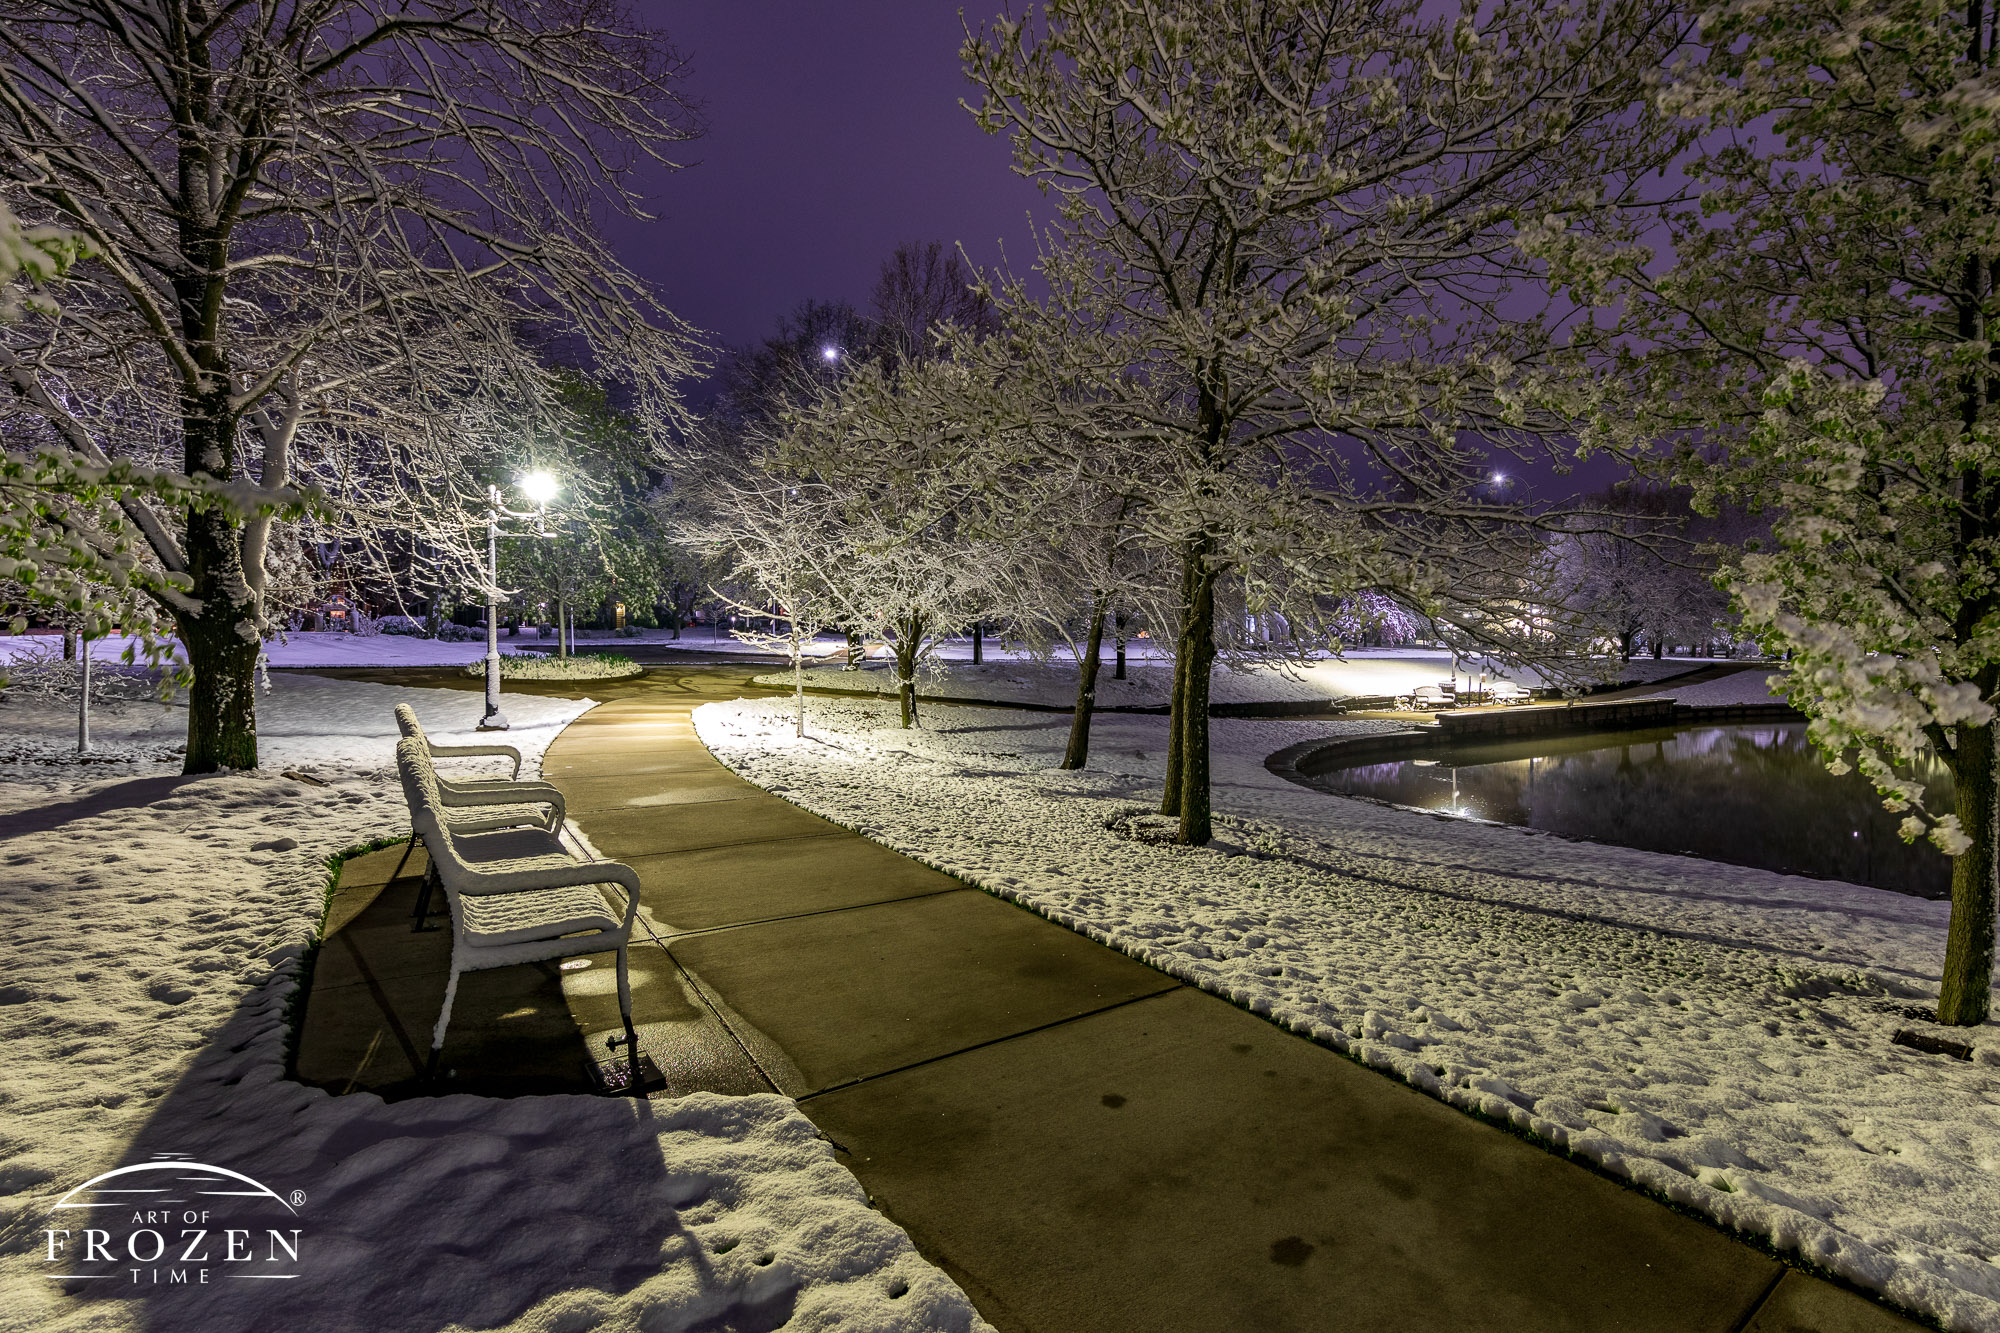 A park pathway during a late spring snow where the blooming tree branches strain under their power white coating.